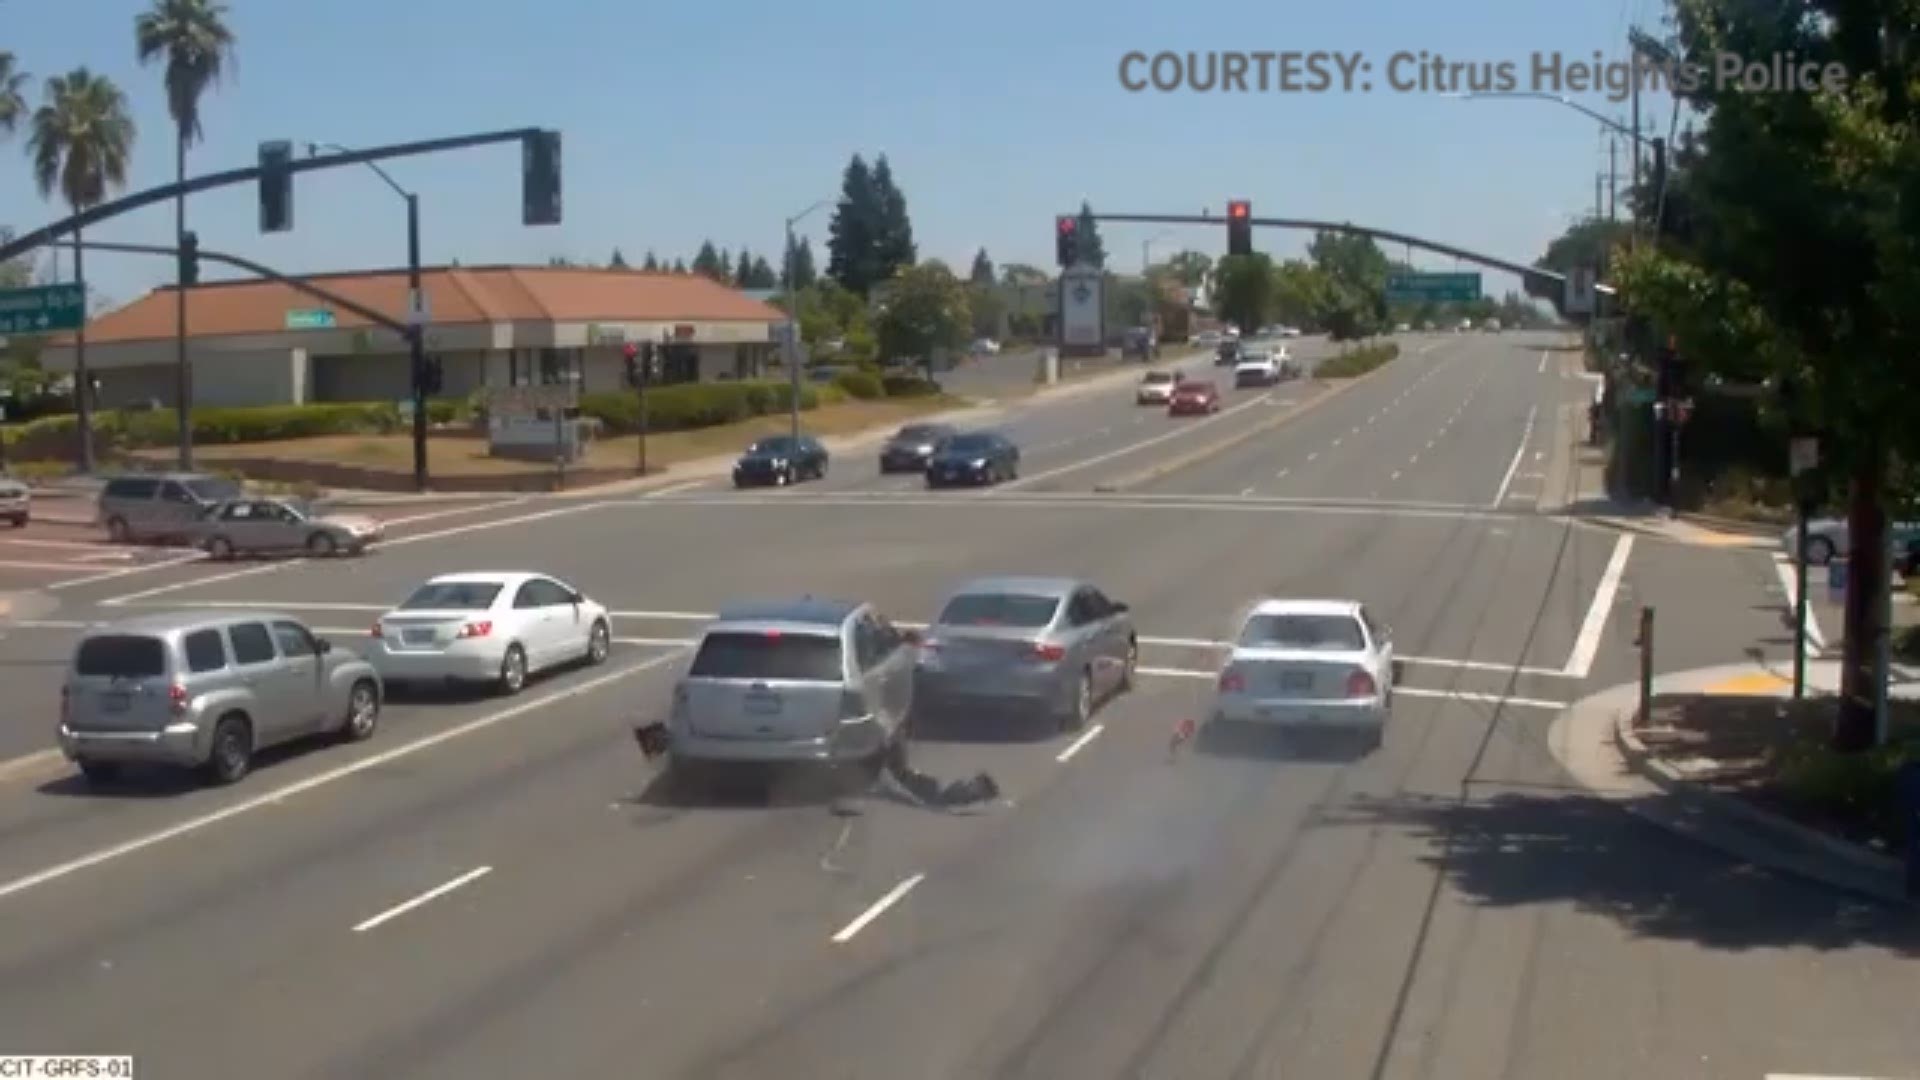 The montage video shows multiple drivers running various red lights.